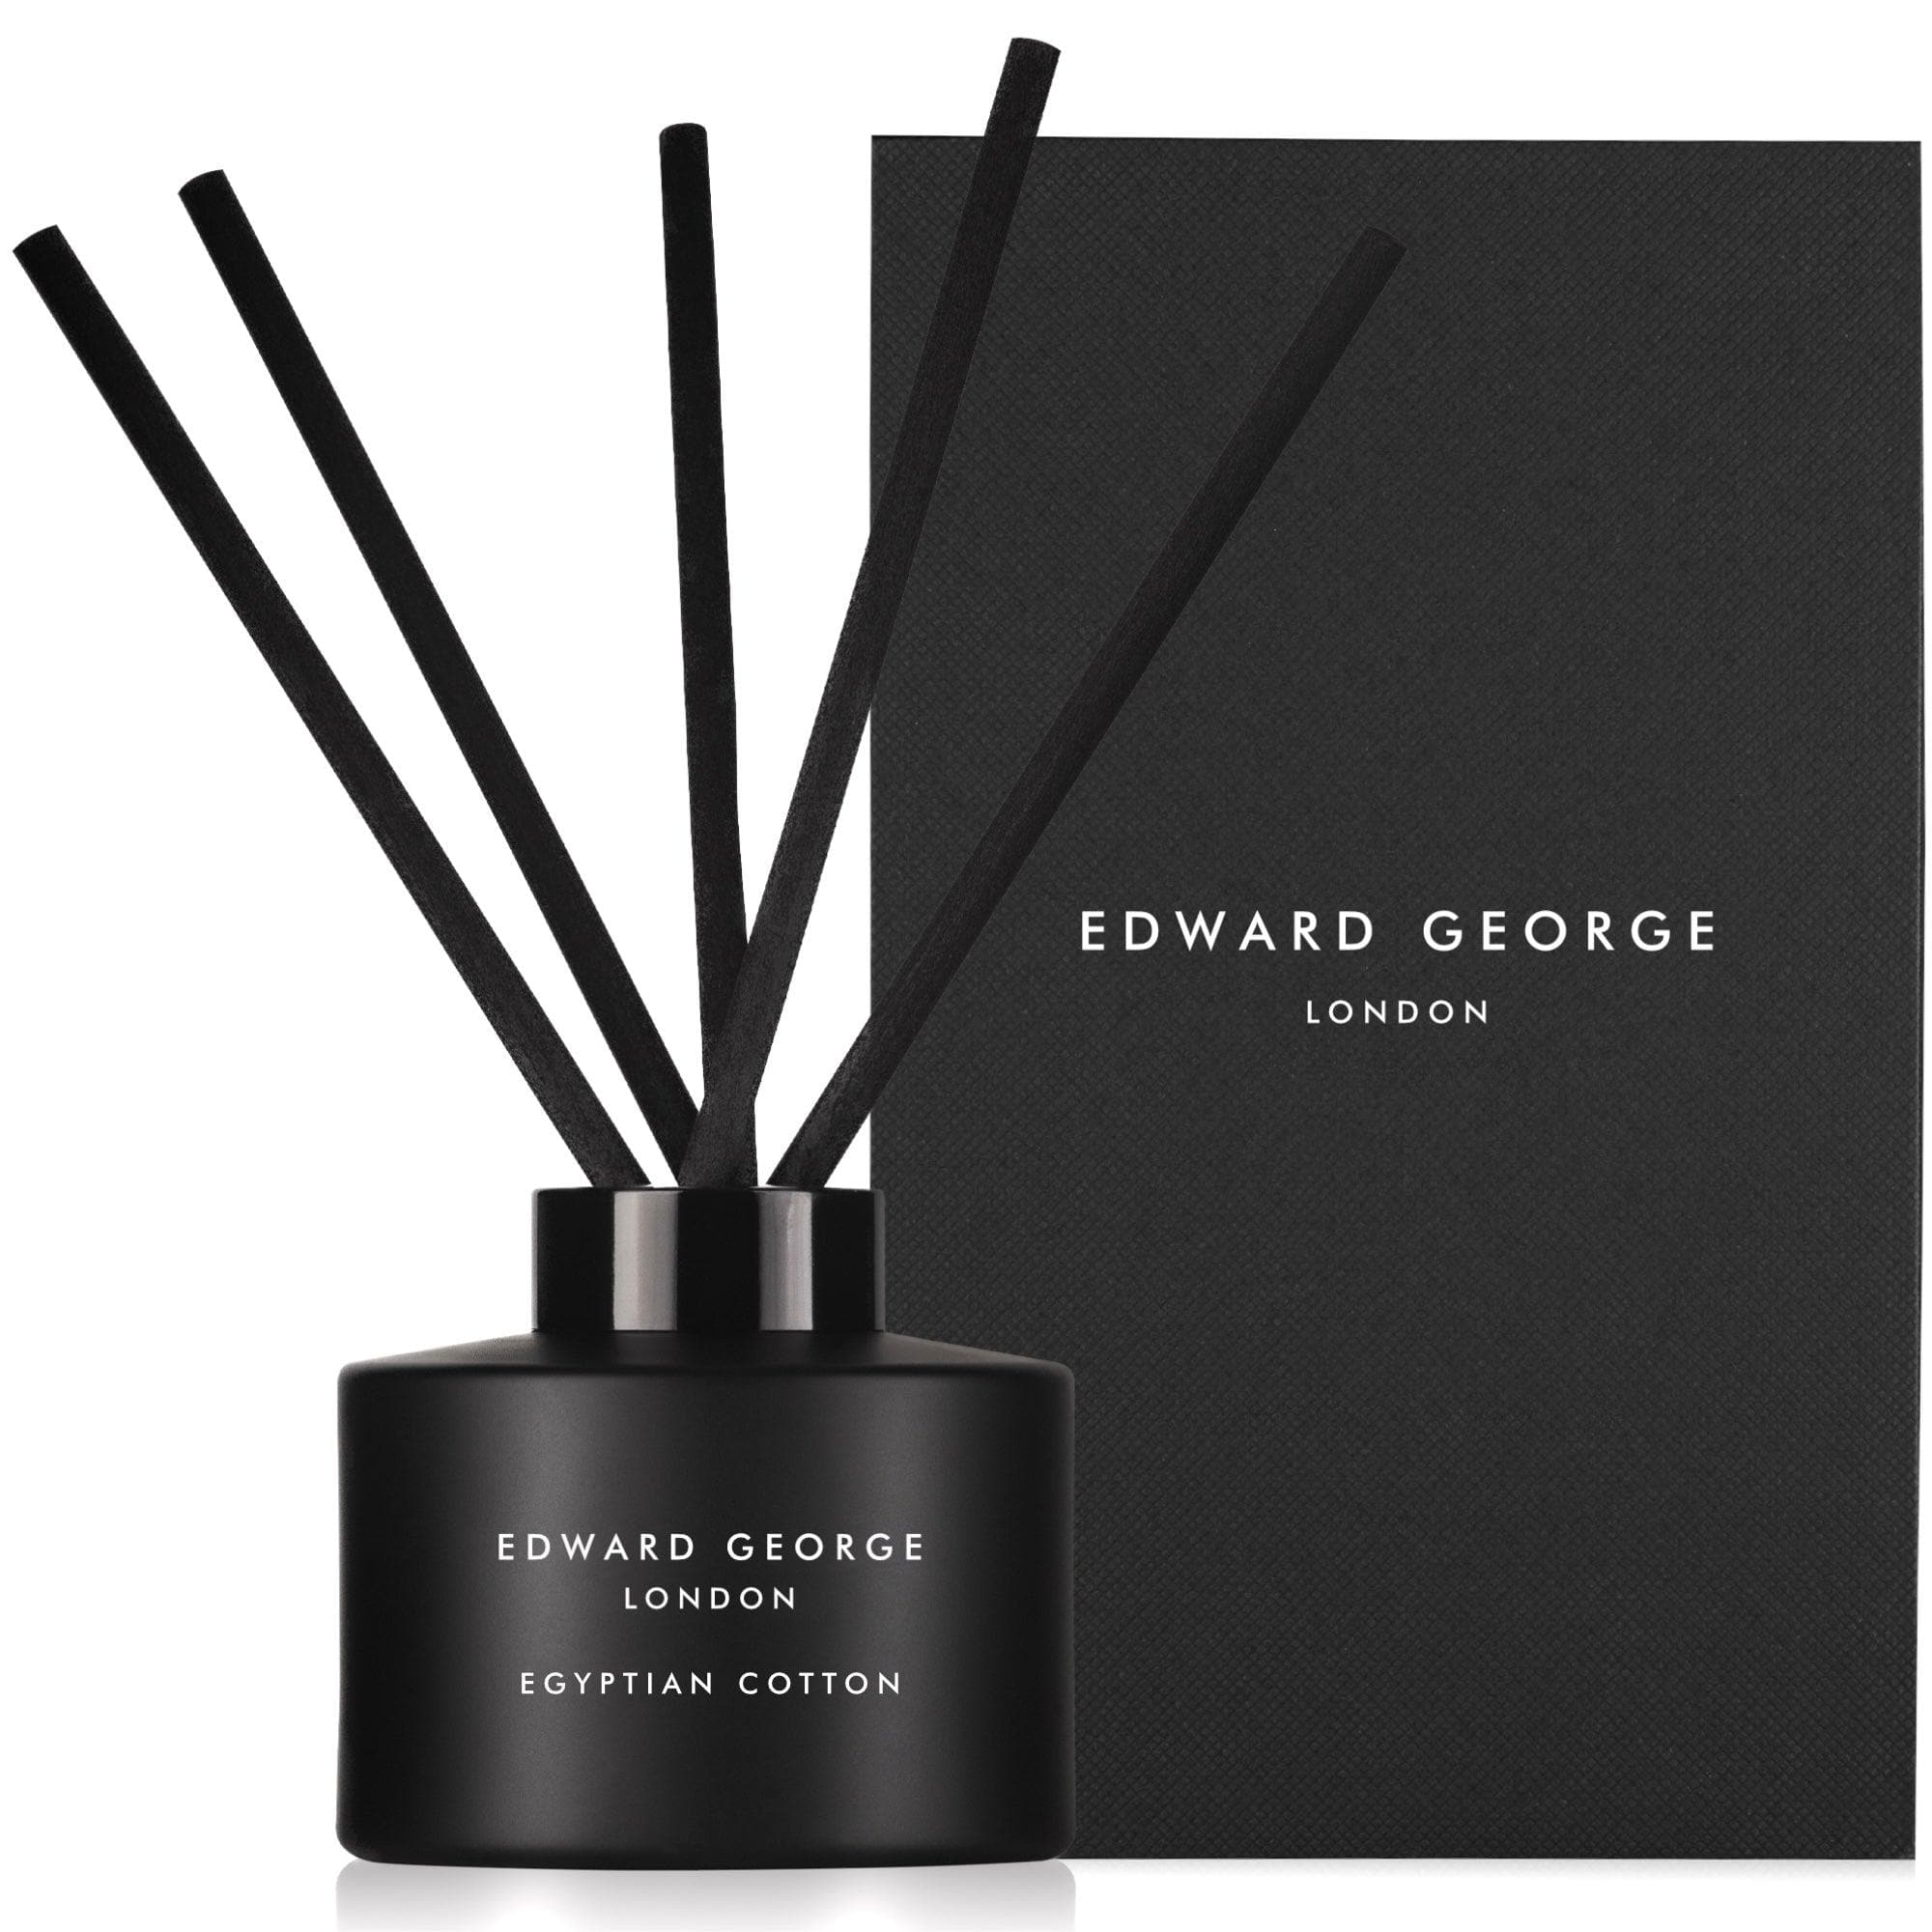 egyptian cotton reed diffusers refills home fragrance decor room edward george london infographic luxury gift ritual scented england sticks scent oil diffuser refill women men black